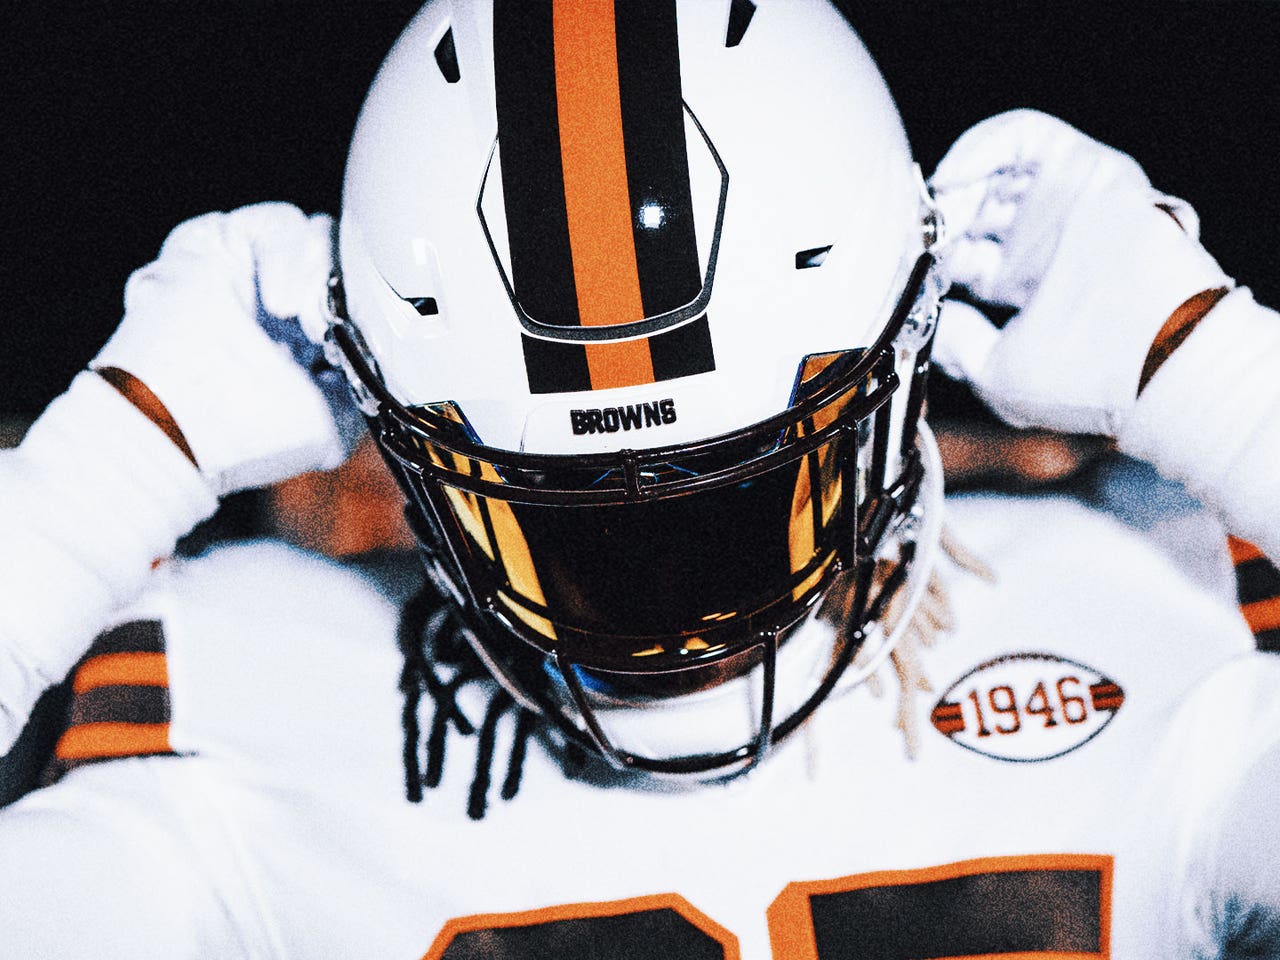 Could the Cleveland Browns actually wear white alternate helmets